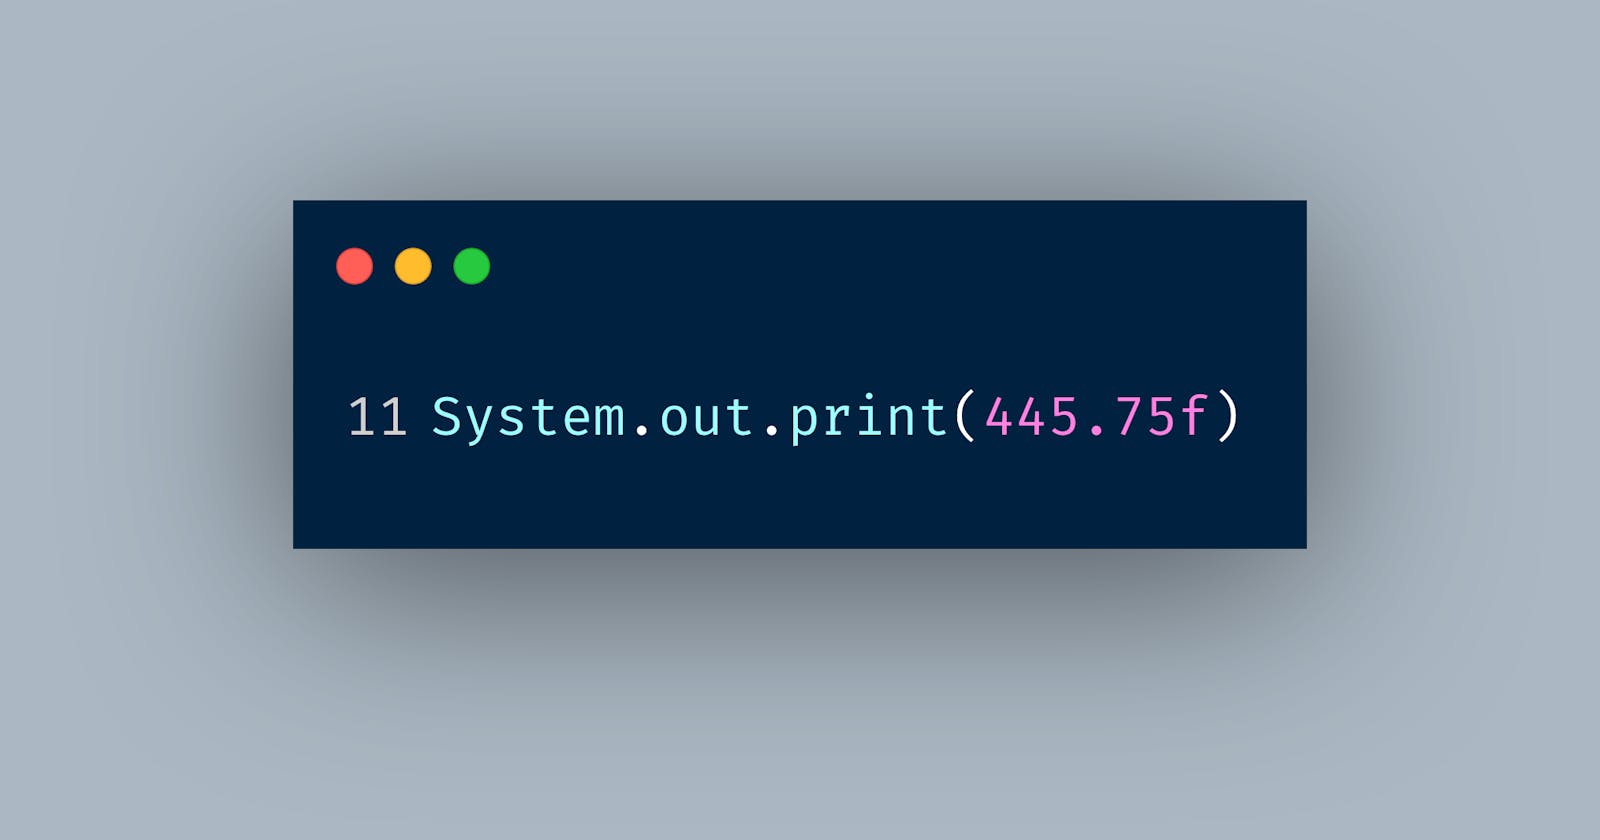 System.out.print(445.75f)